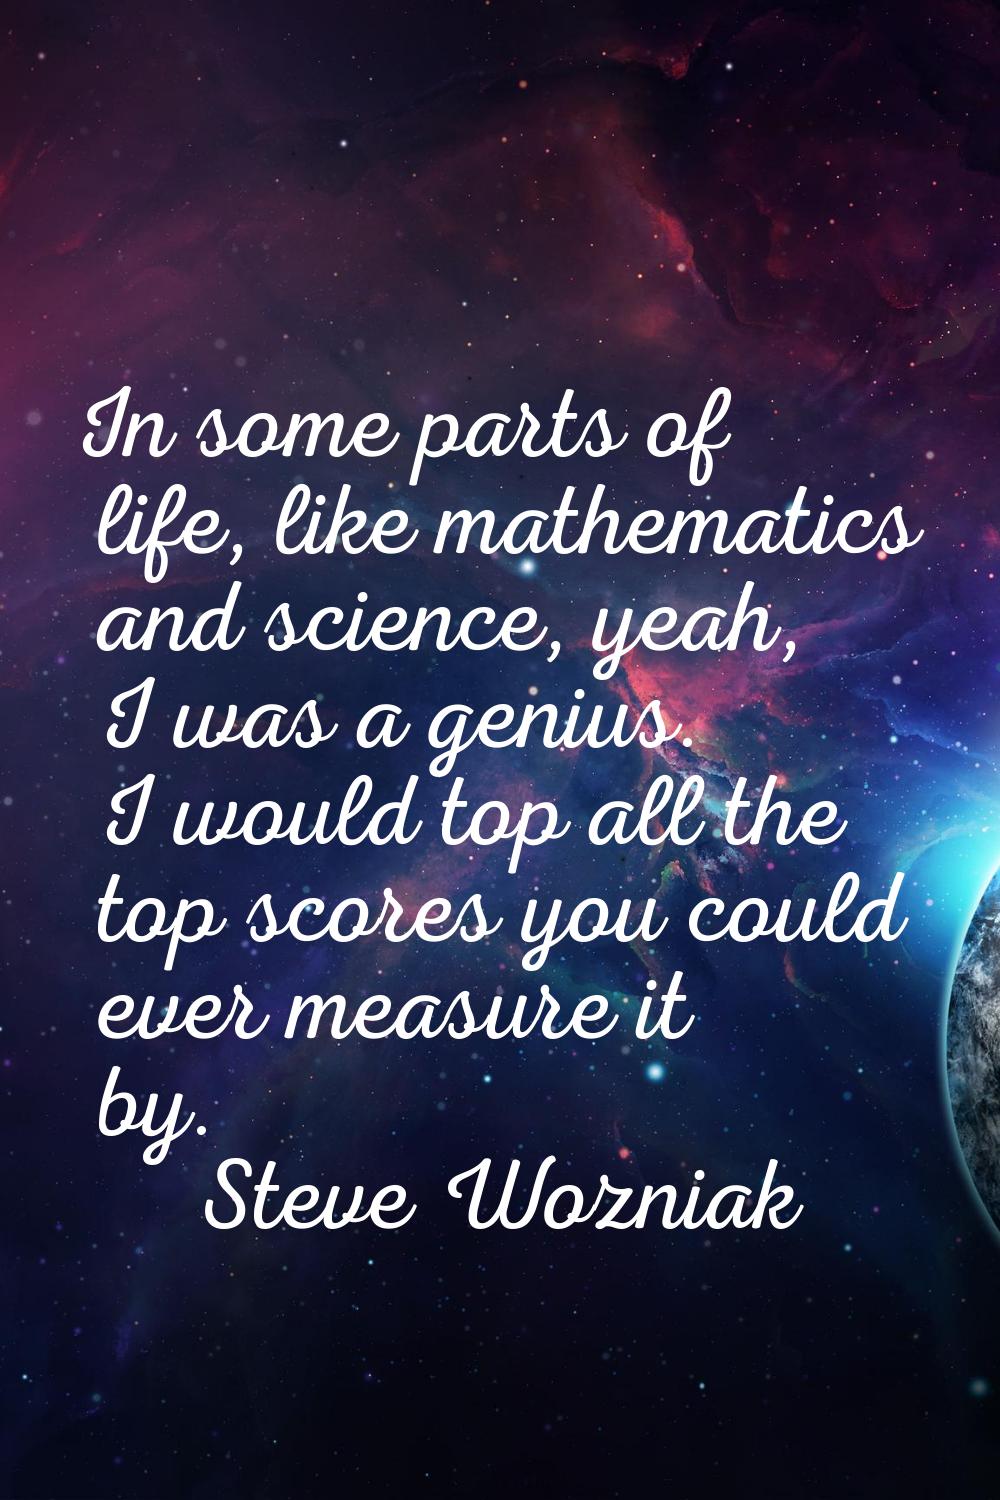 In some parts of life, like mathematics and science, yeah, I was a genius. I would top all the top 